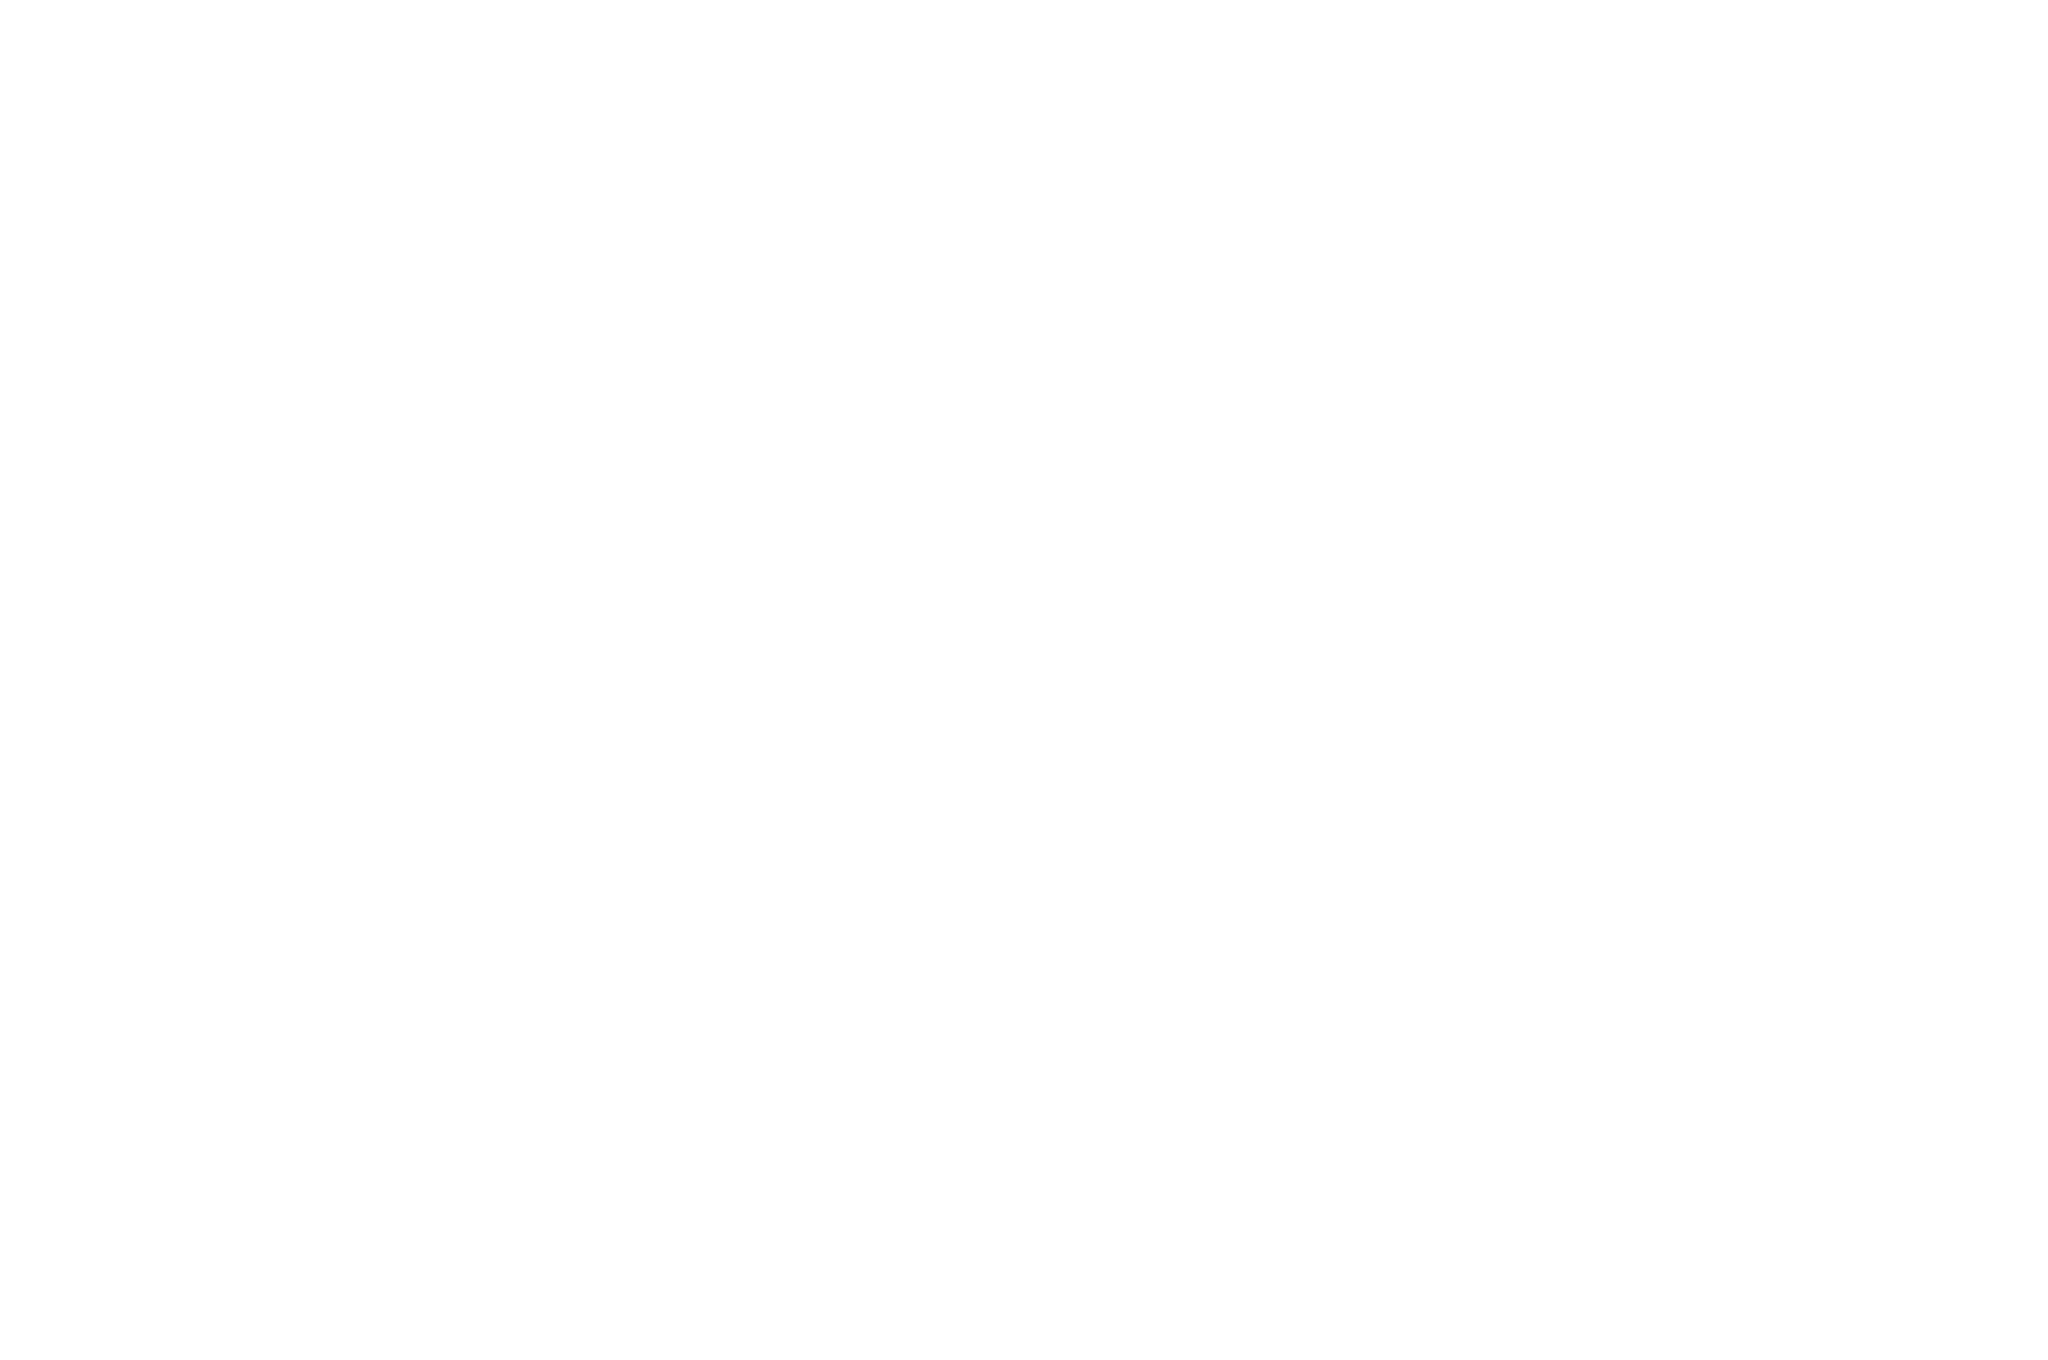 Cannes World Art Festival - Official Selection (White)